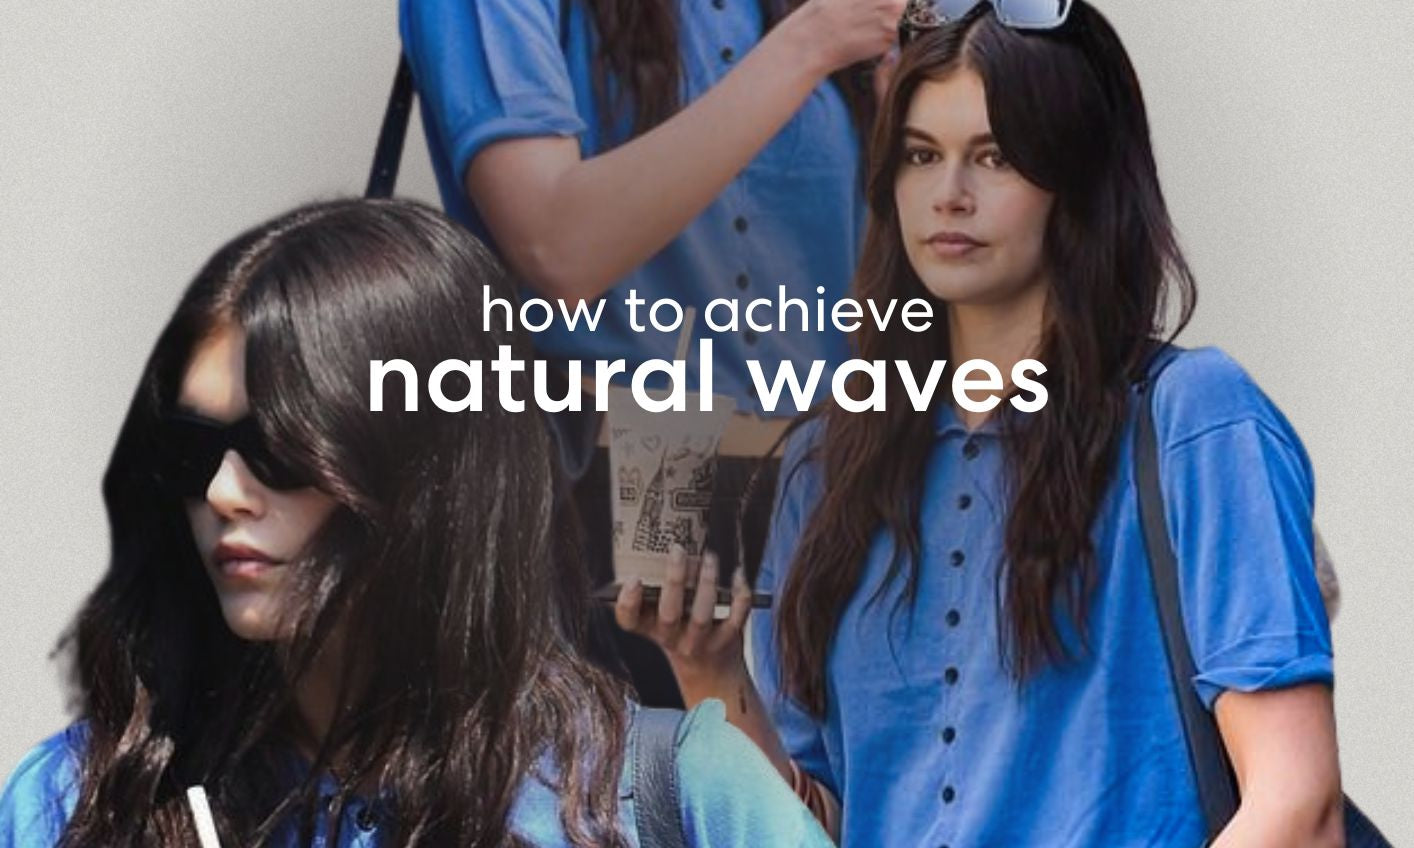 Kaia Gerber’s natural waves couldn’t be easier to create